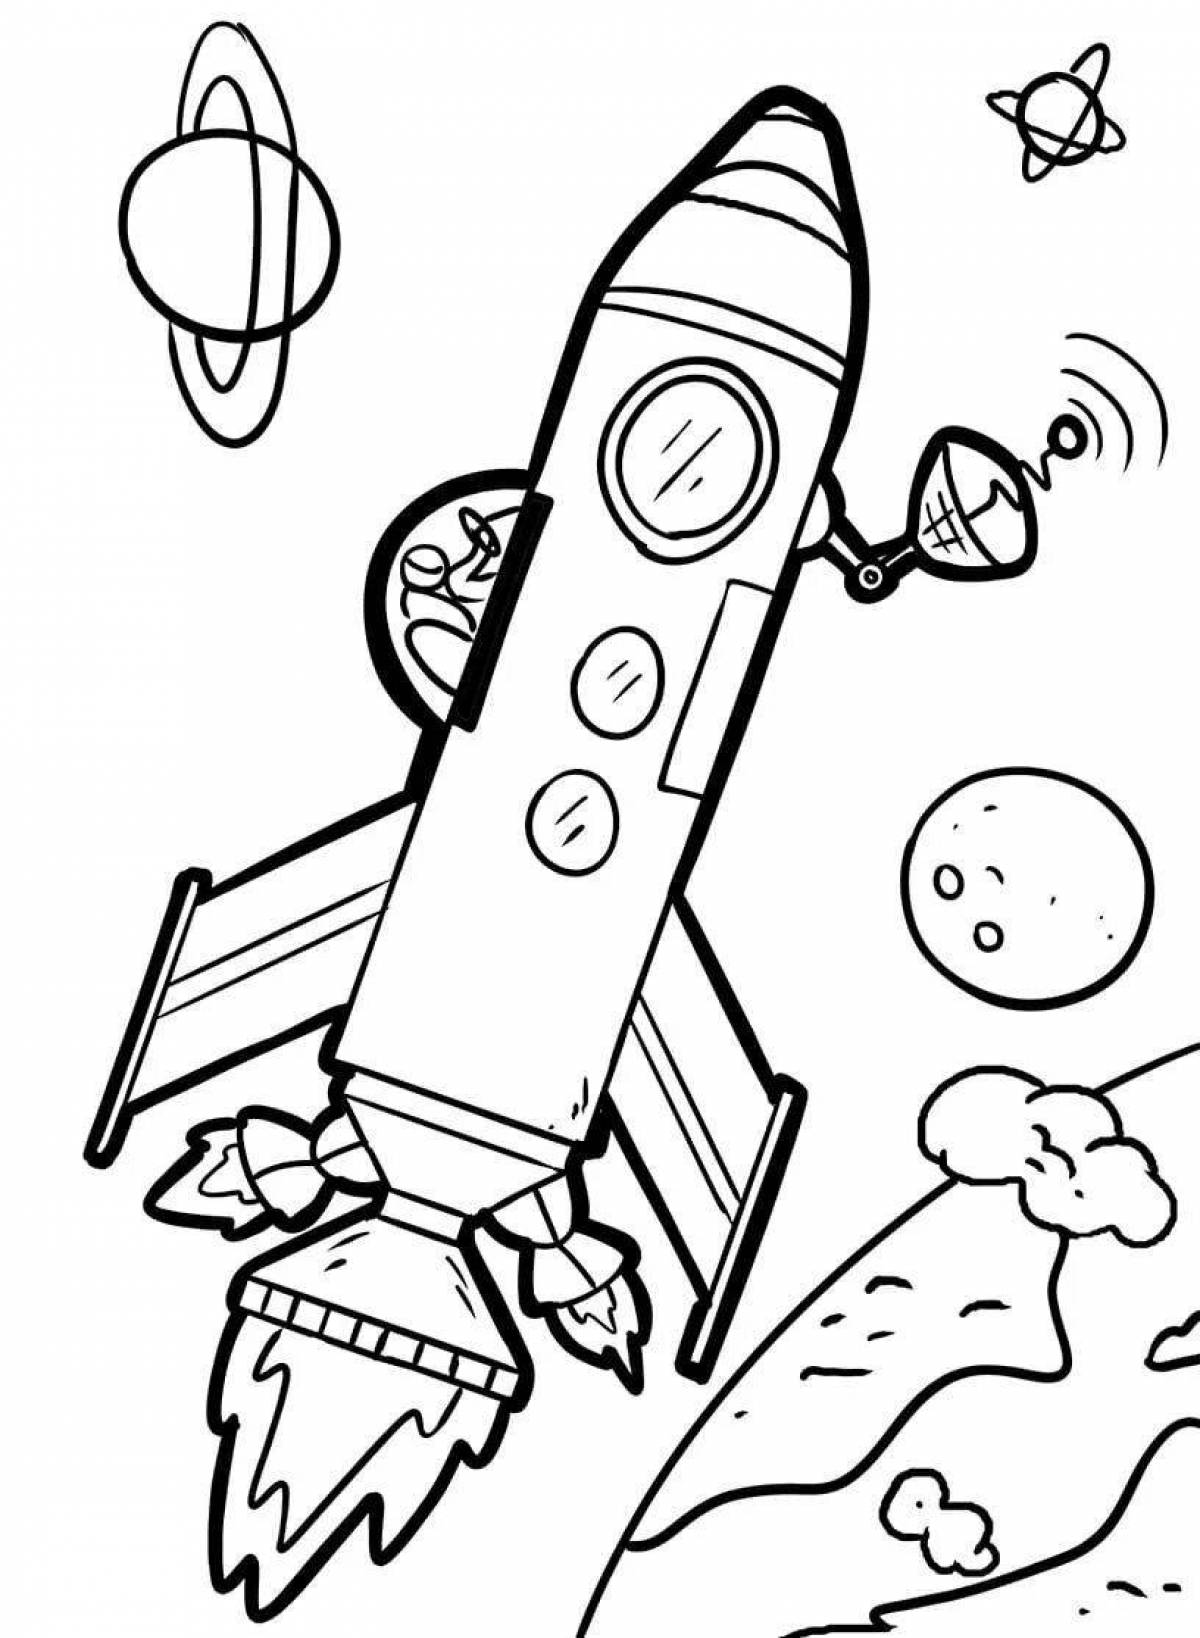 Outstanding rocket coloring book for kids